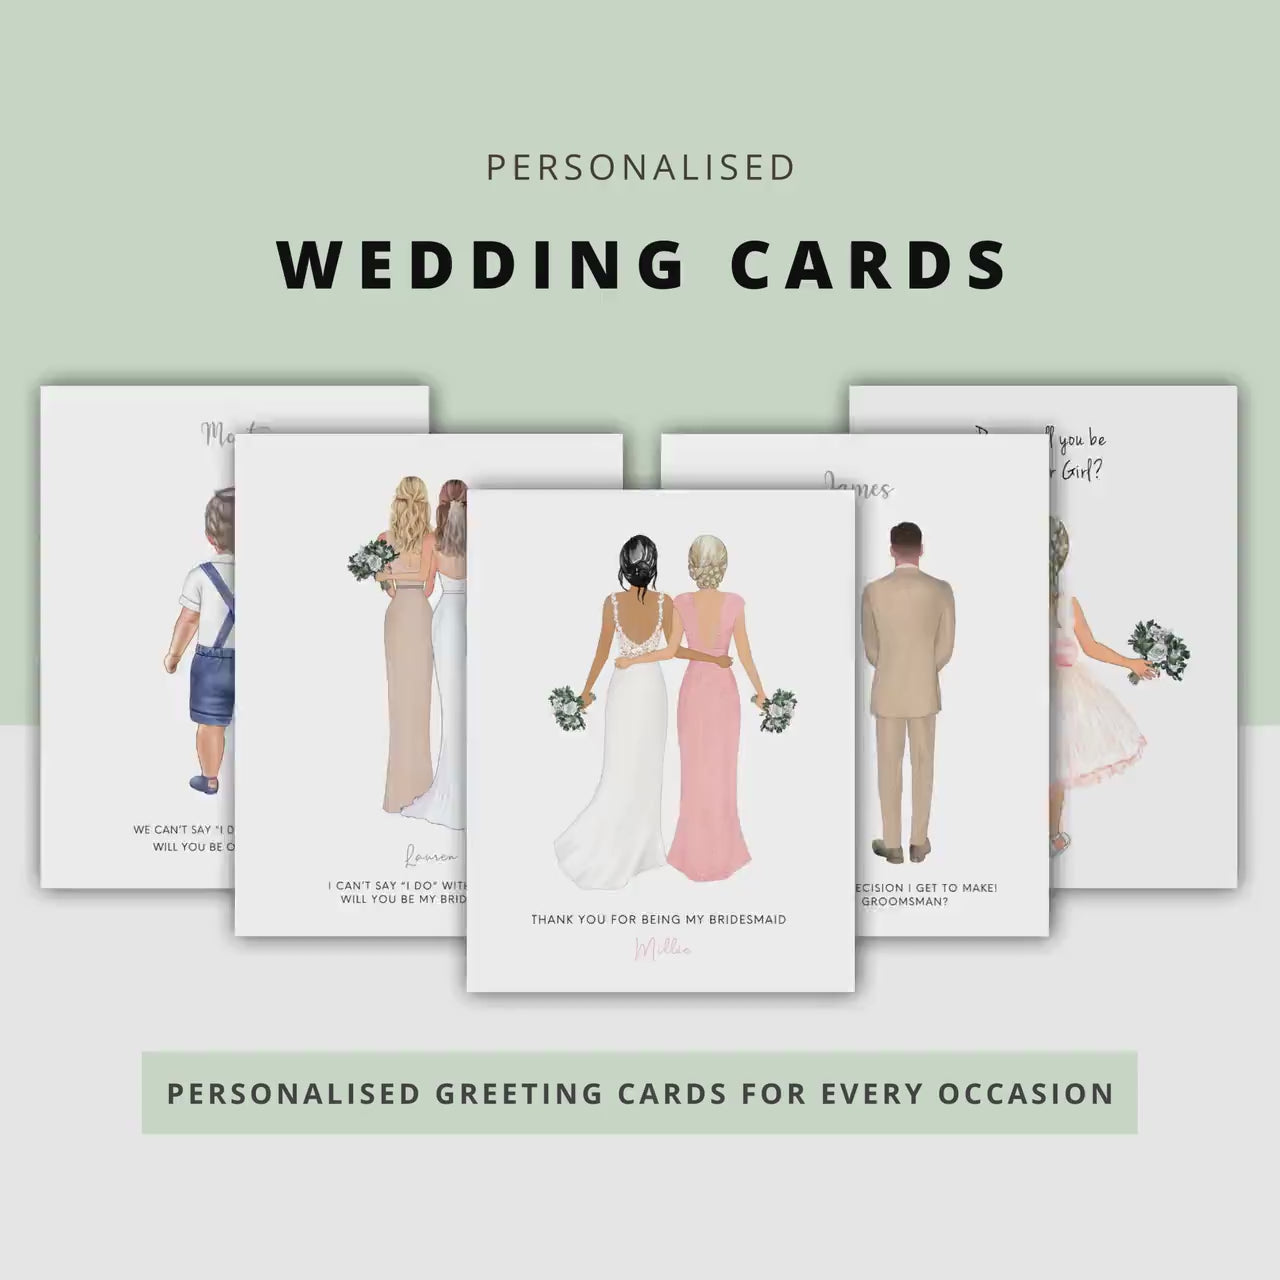 Will You Be My Bridesmaid Card, Will You Be My Maid of Honor Card, Bridesmaid Proposal Cards, Thank you for being my Bridesmaid Card